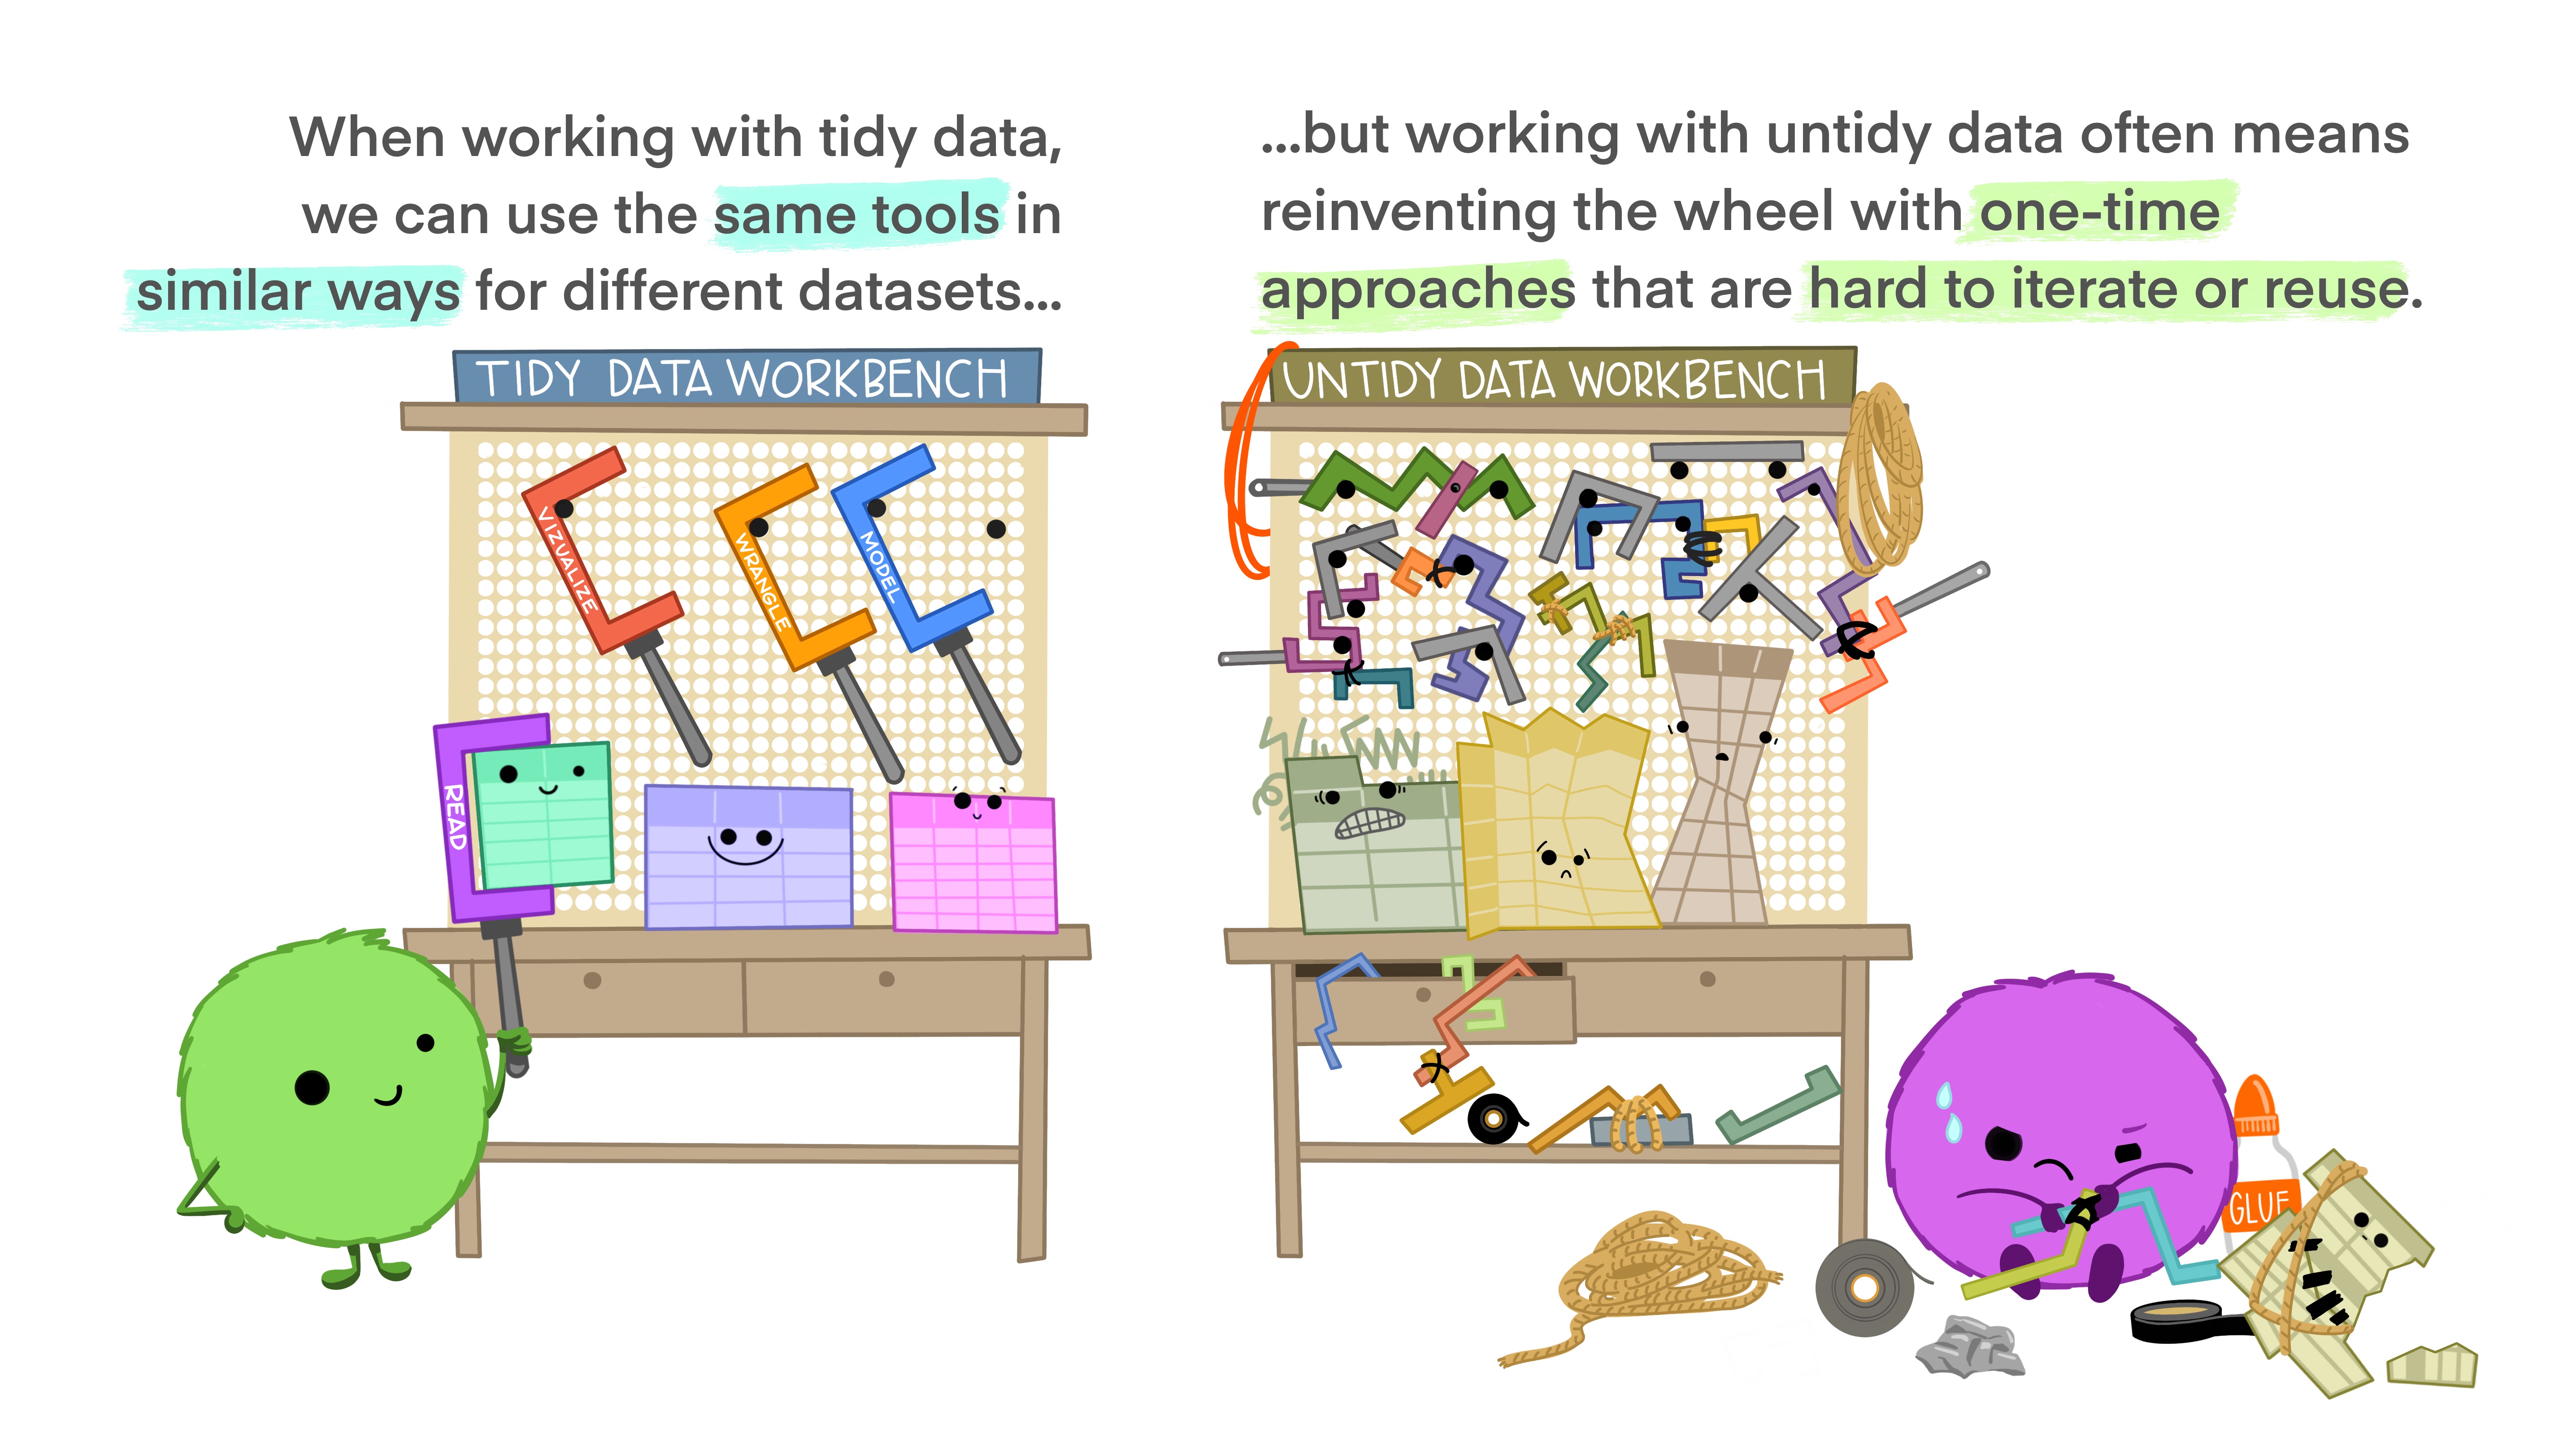 Illustrations from the Openscapes blog Tidy Data for reproducibility, efficiency, and collaboration by Julia Lowndes and Allison Horst